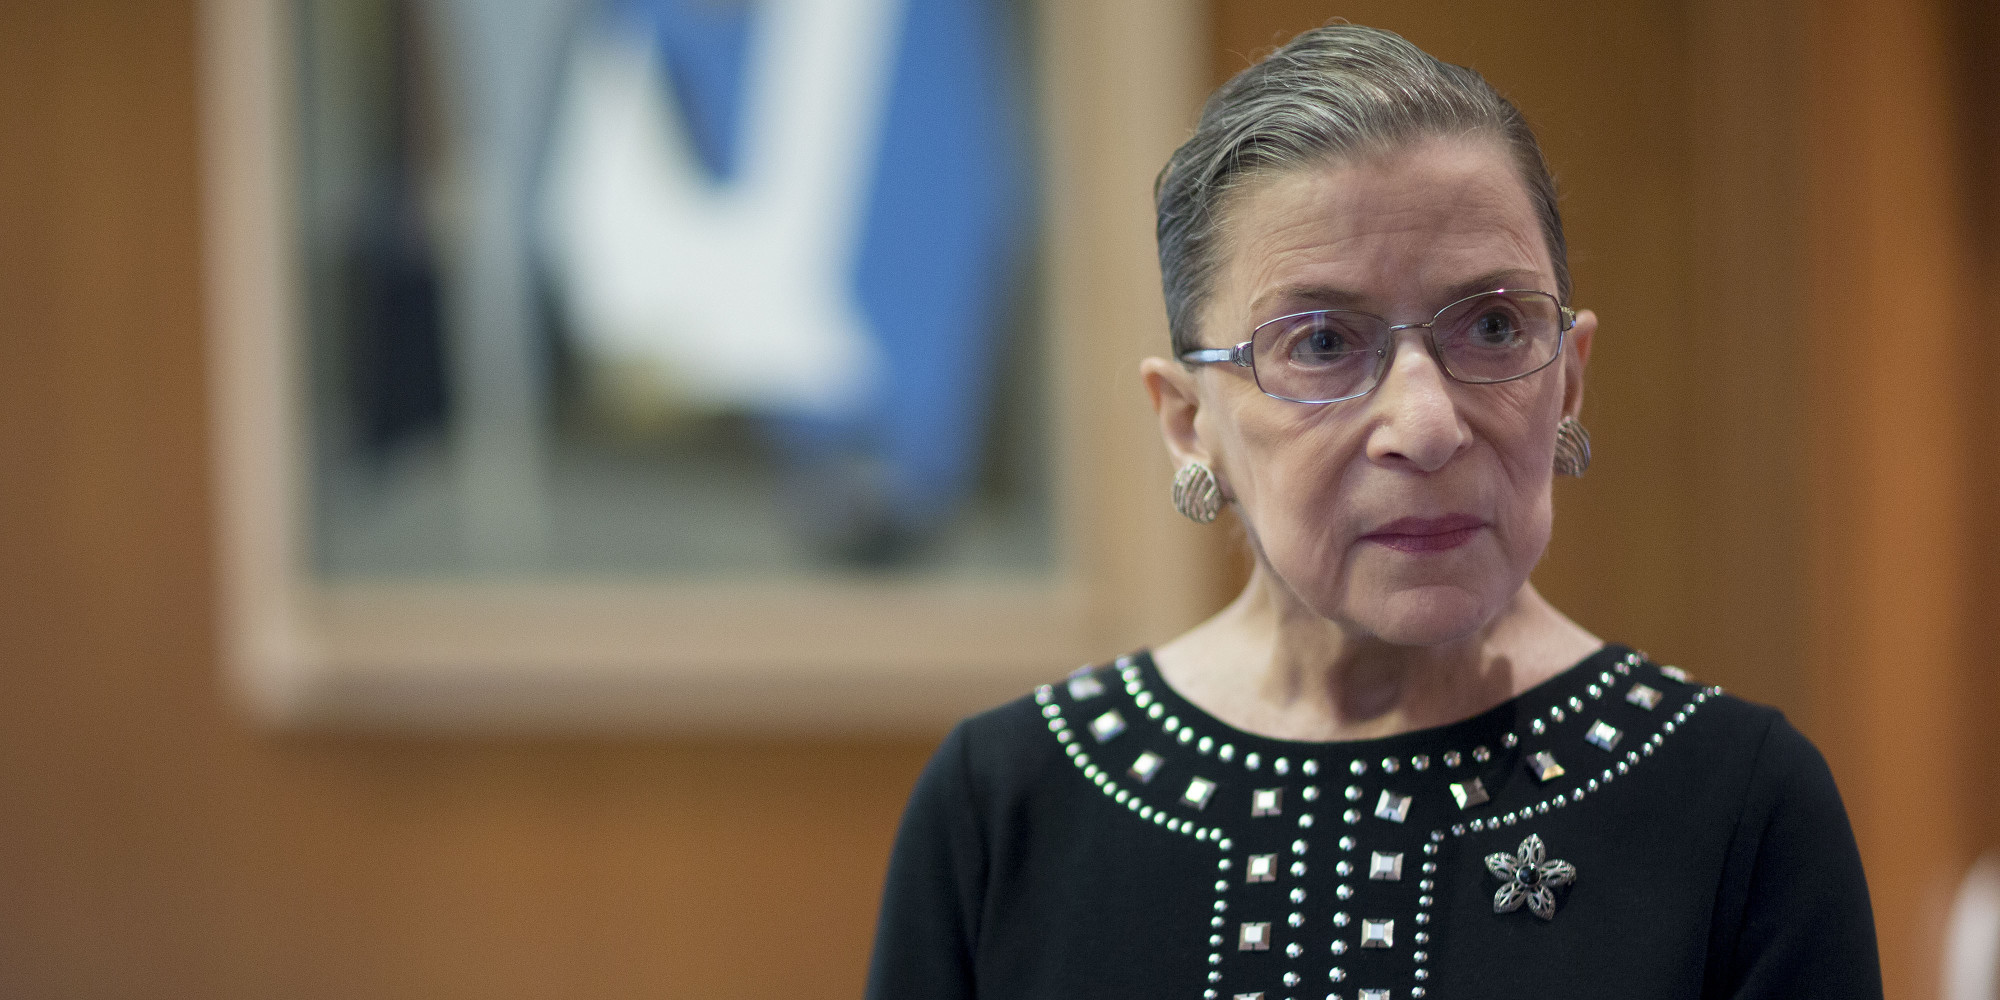 Ruth Bader Ginsburg, associate justice of the U.S. Supreme Court, stands in her chambers following an interview in Washington, D.C., U.S., on Friday, Aug. 23, 2013. Ginsburg, 80, the oldest member of the Supreme Court and appointed to the court in 1993 by Democratic President Bill Clinton, has said on several occasions that she wants to match the longevity of Justice Louis Brandeis, who was 82 when he stepped down in 1939. Photographer: Andrew Harrer/Bloomberg via Getty Images